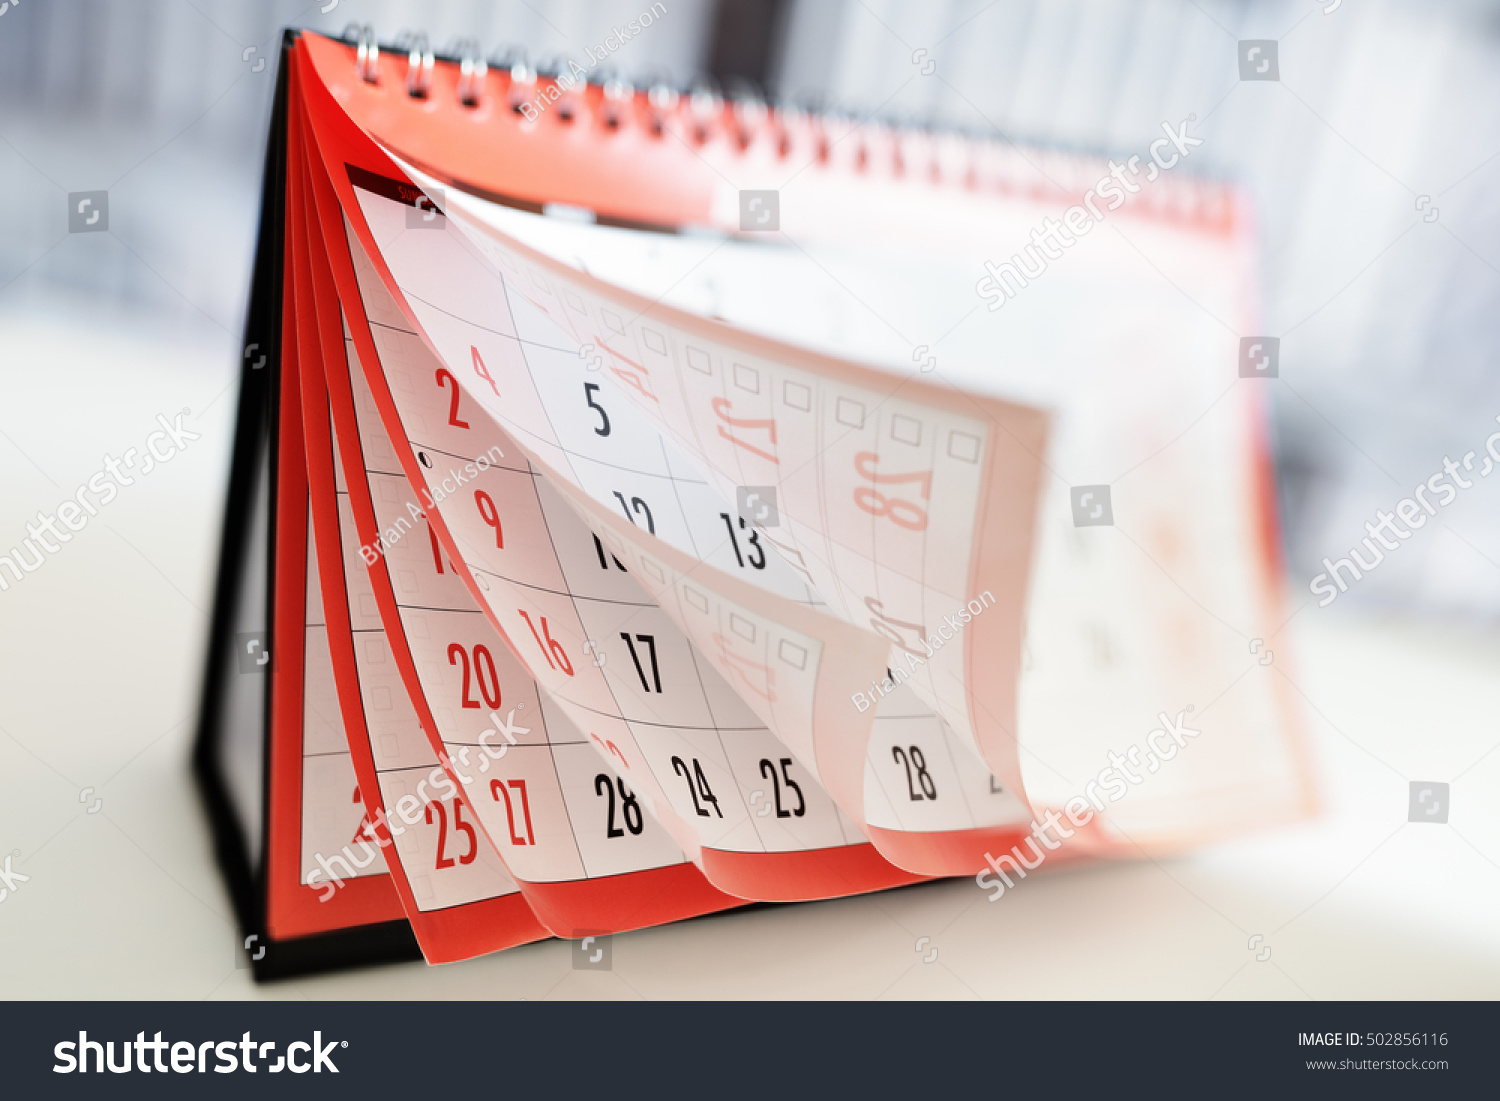 Months and dates shown on a calendar whilst turning the pages #502856116